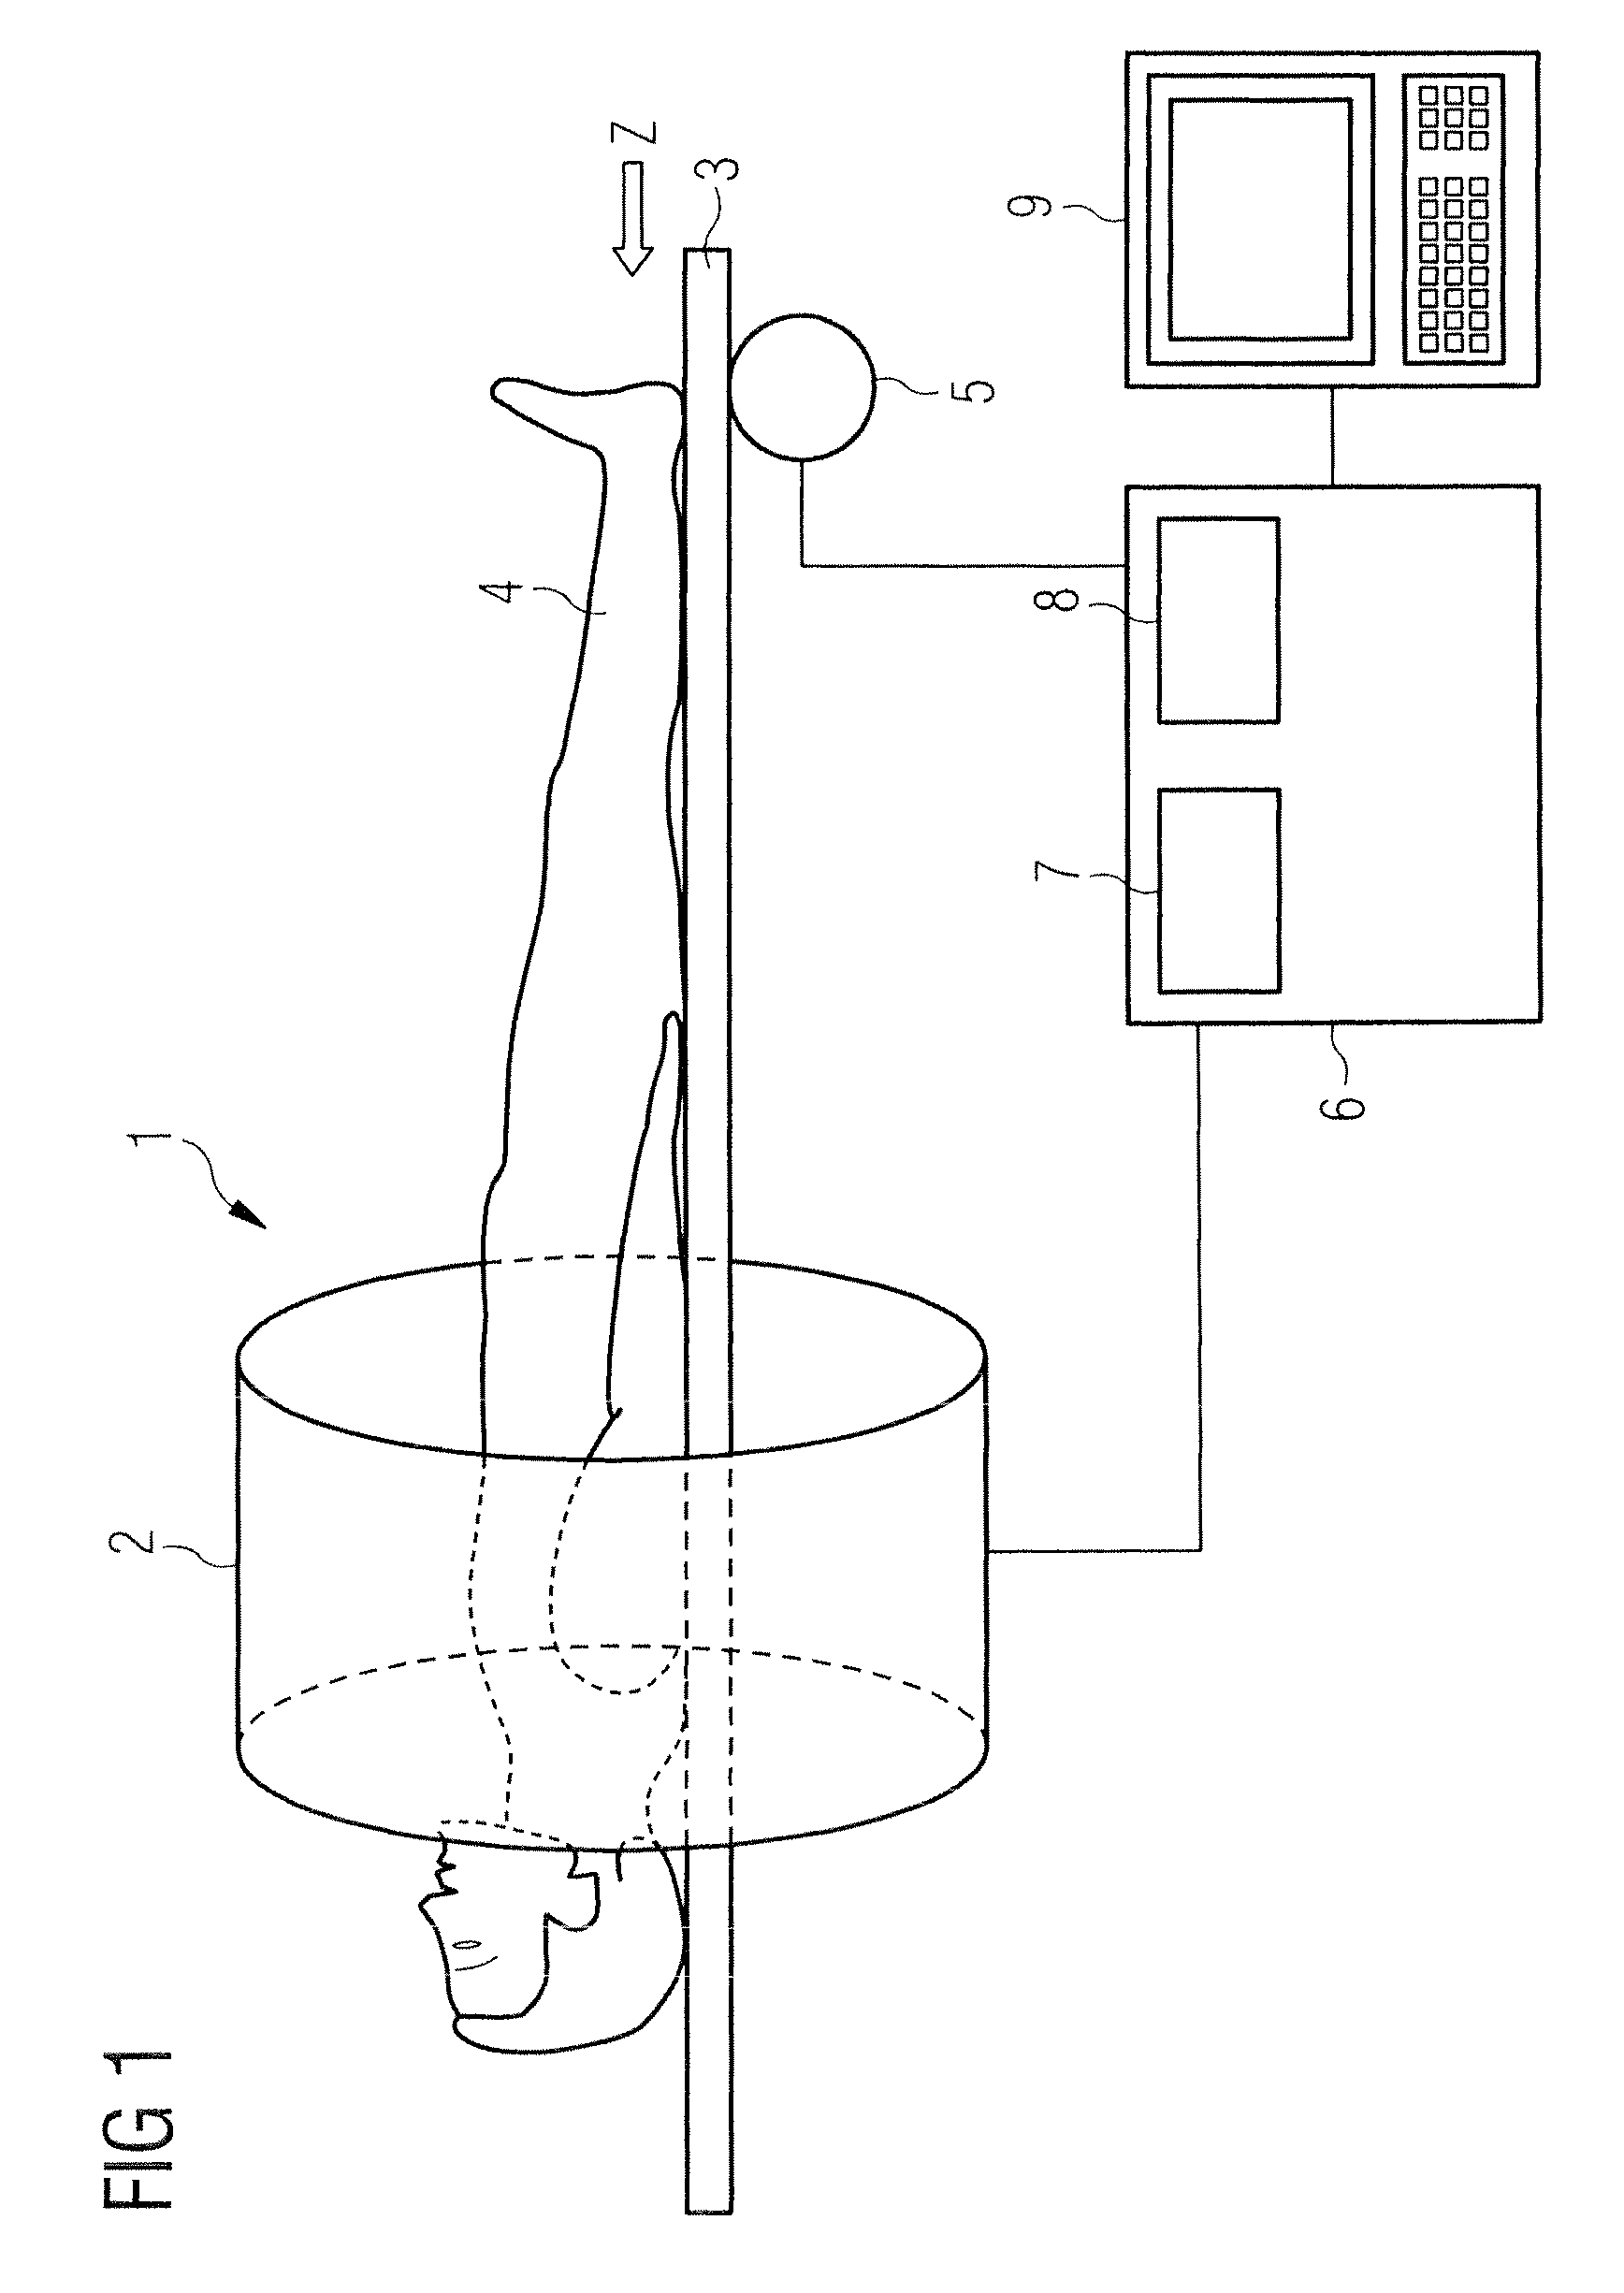 Method and apparatus to generate angiographic magnetic resonance images